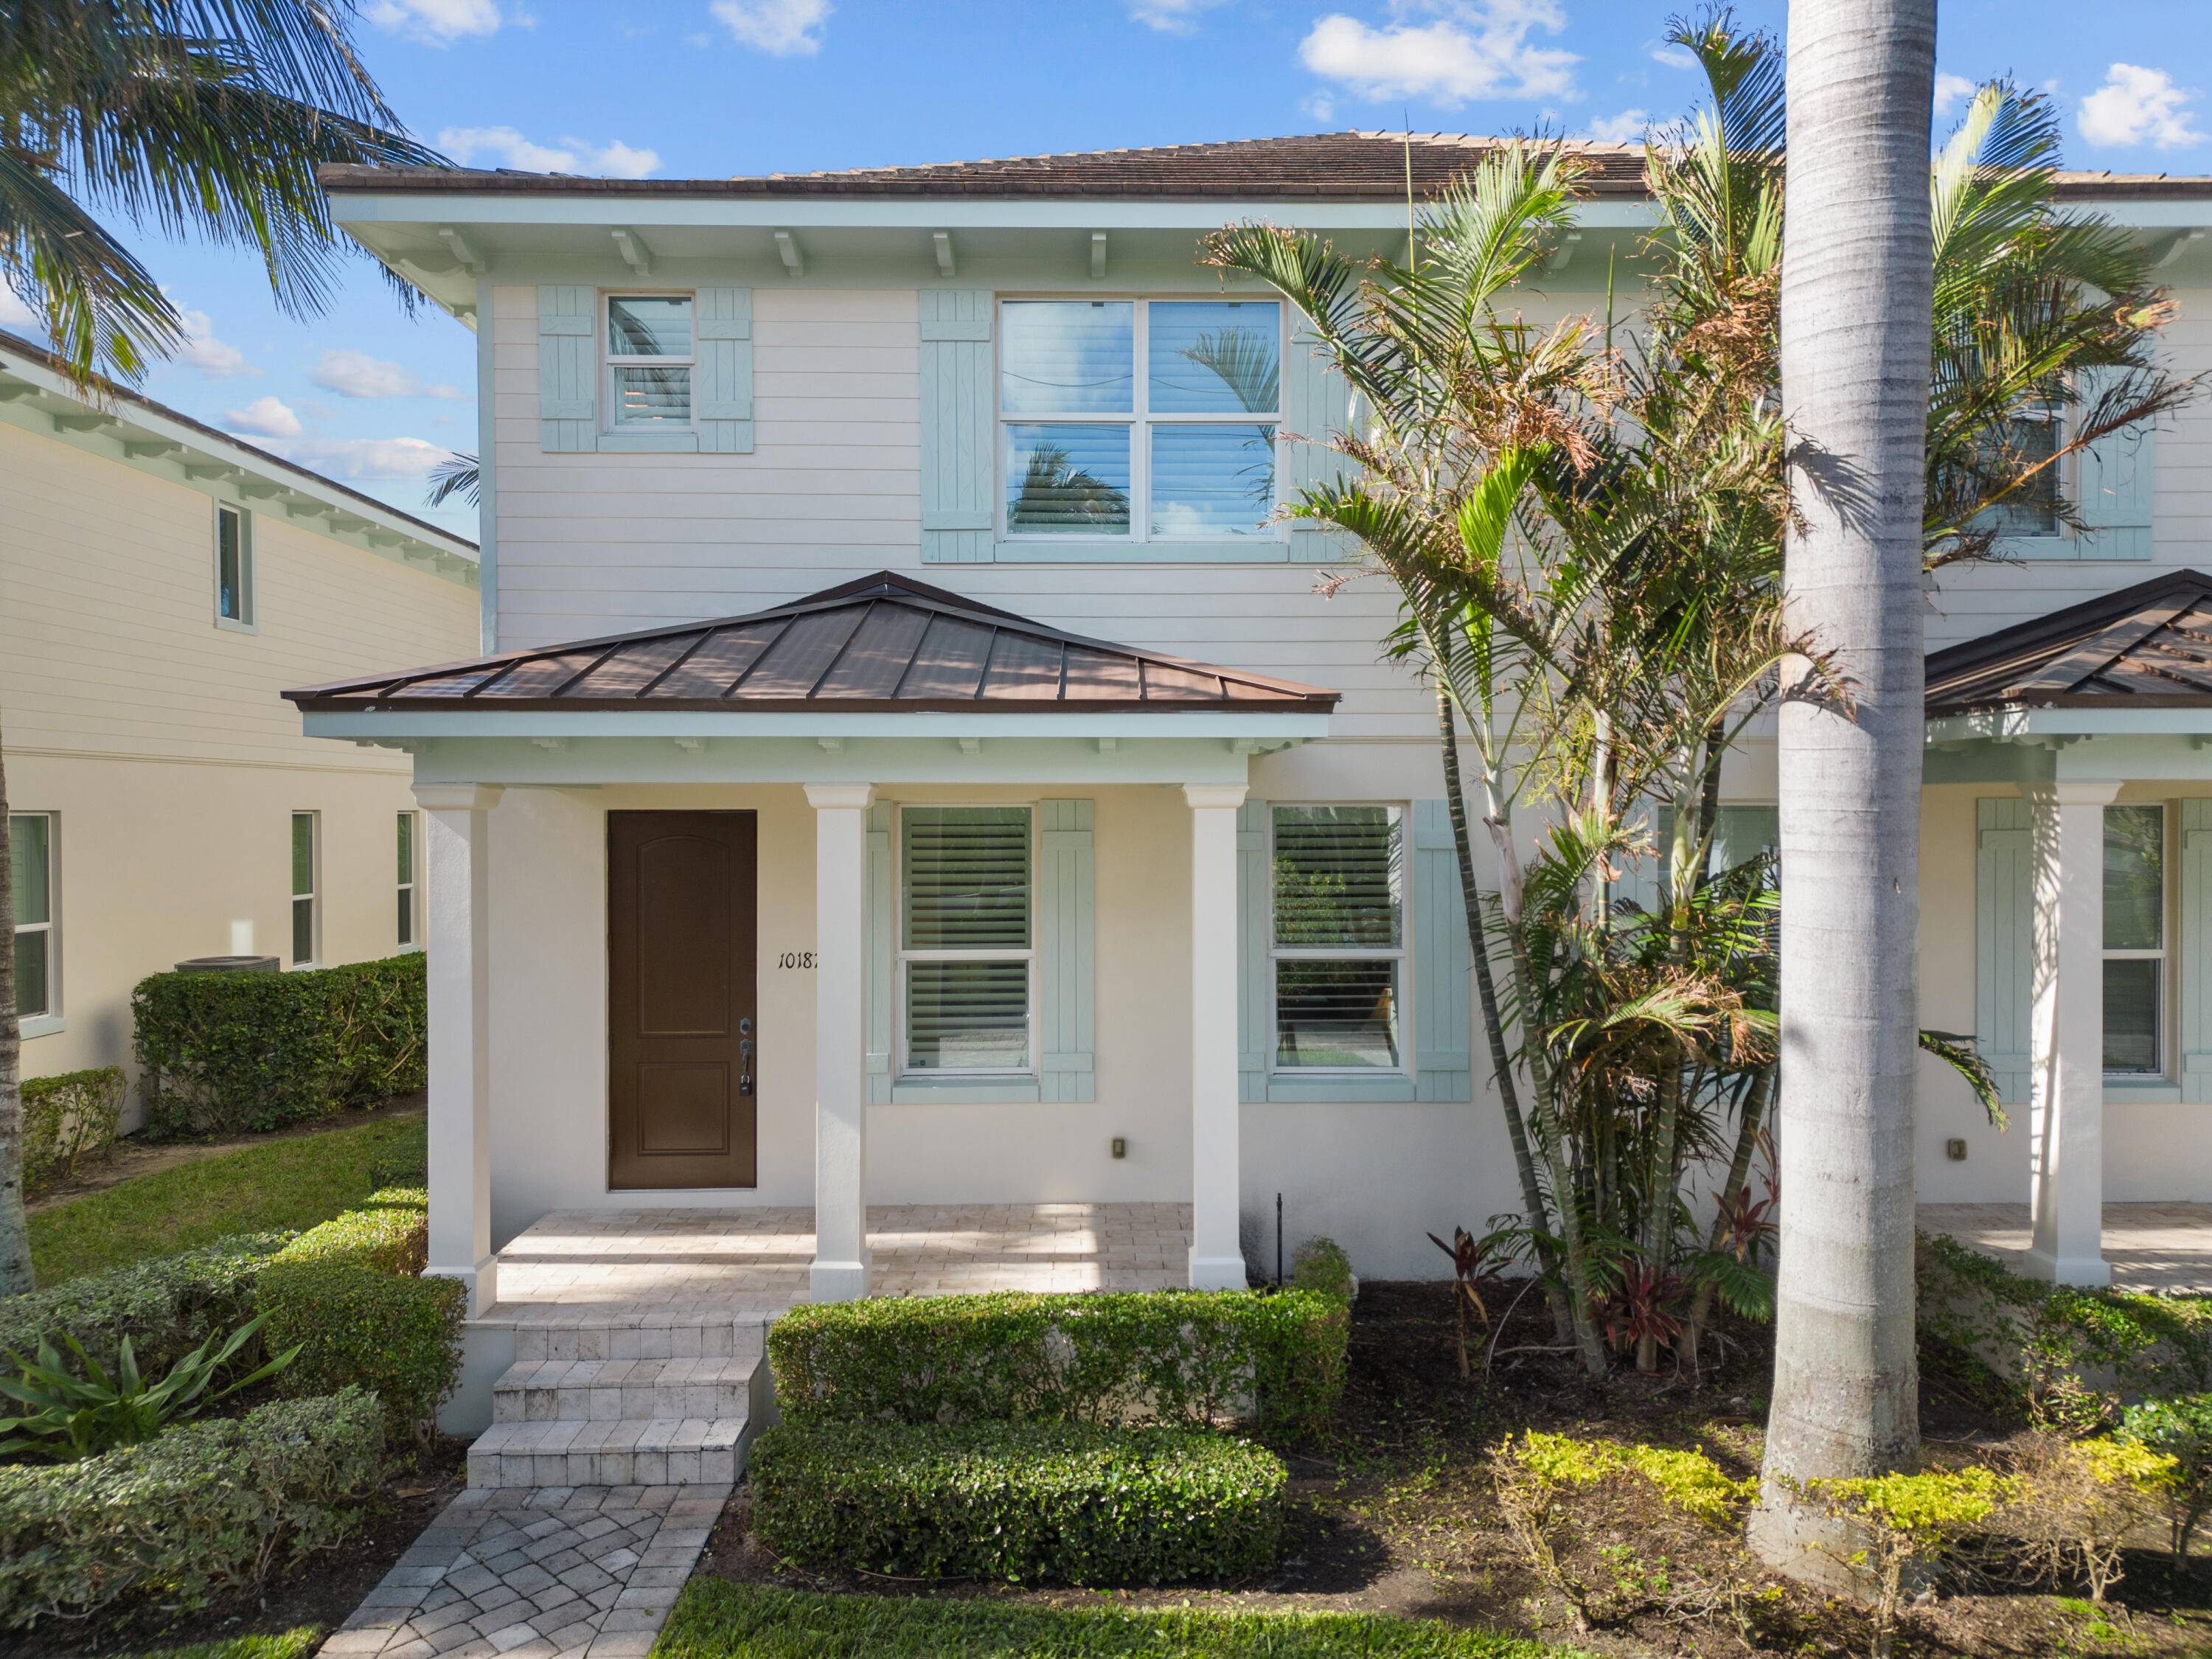 Discover the ultimate beach retreat on Hutchinson Island with direct ocean access just steps away and the tranquil intracoastal waters behind.